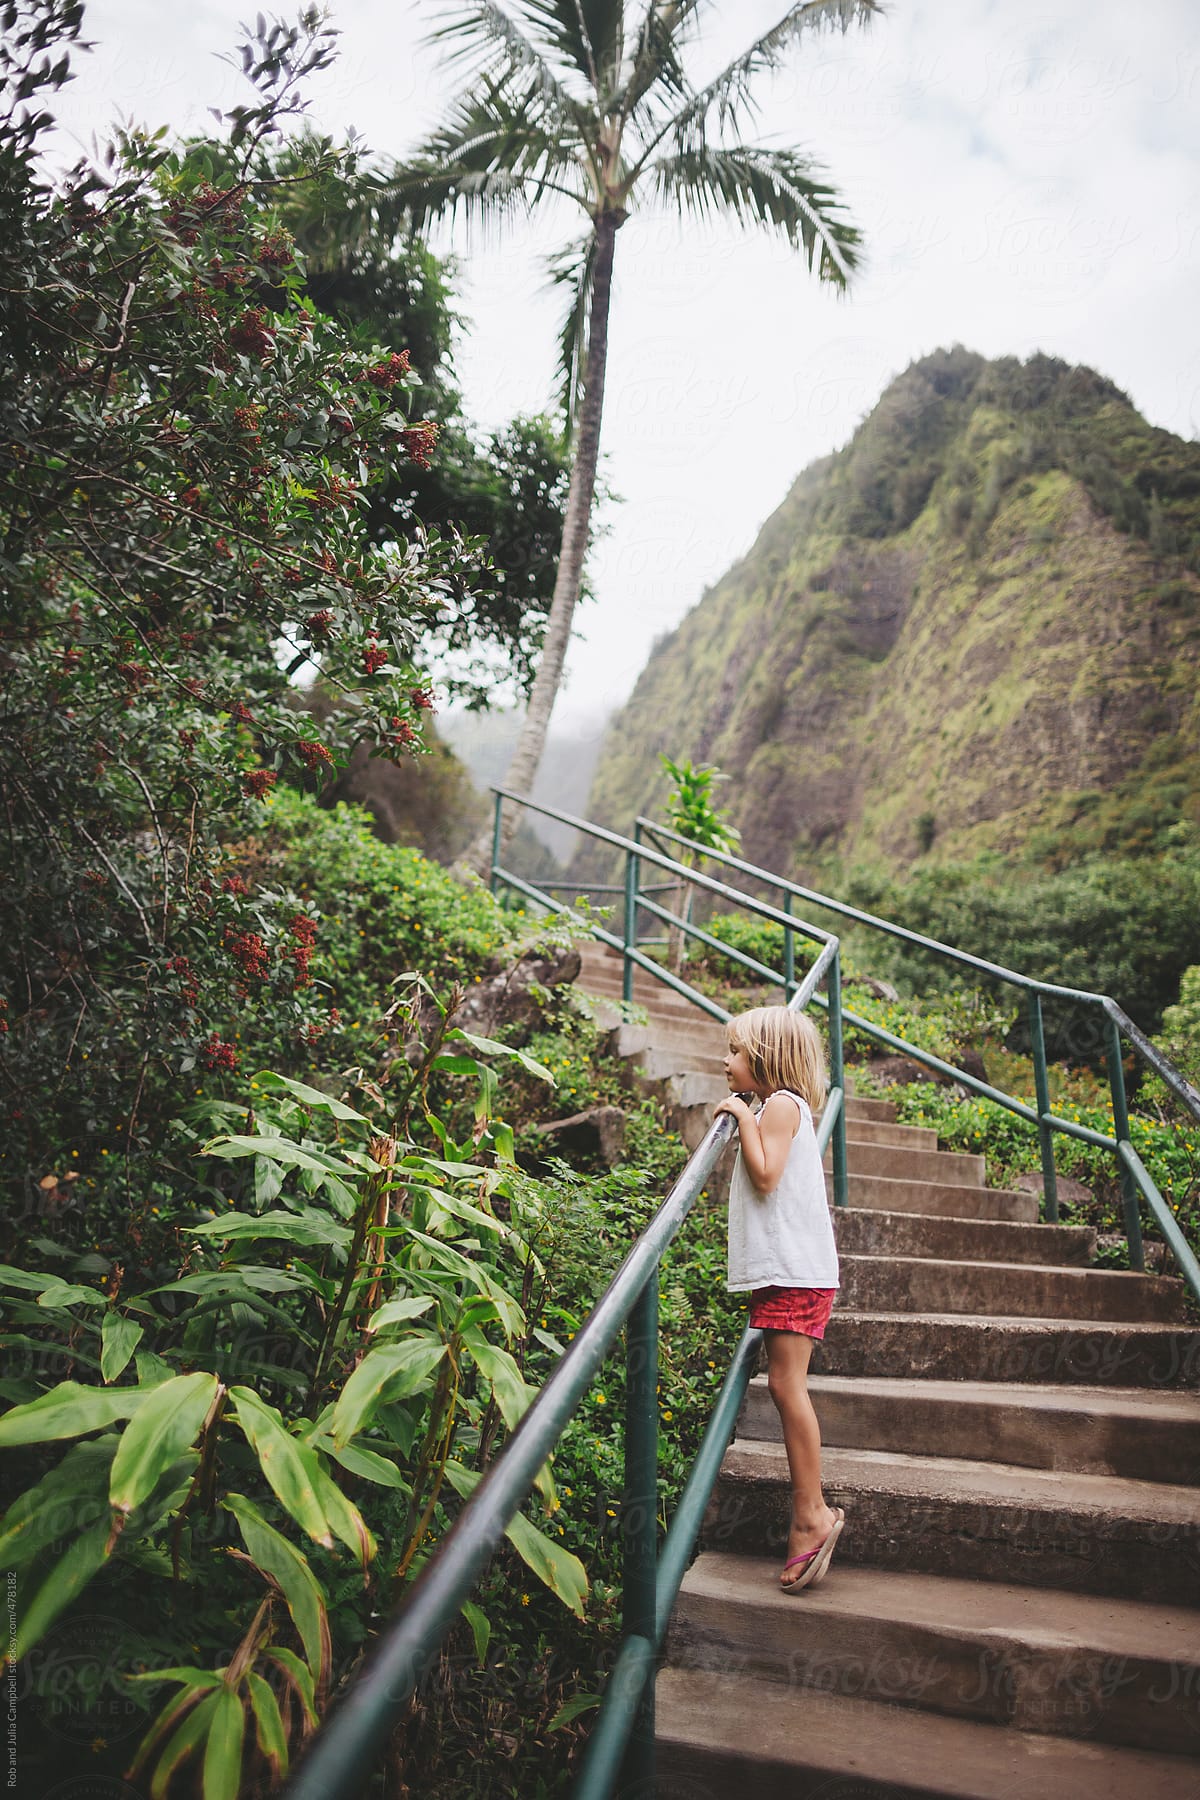 Cute young girl exploring nature in tropical area with many stairs